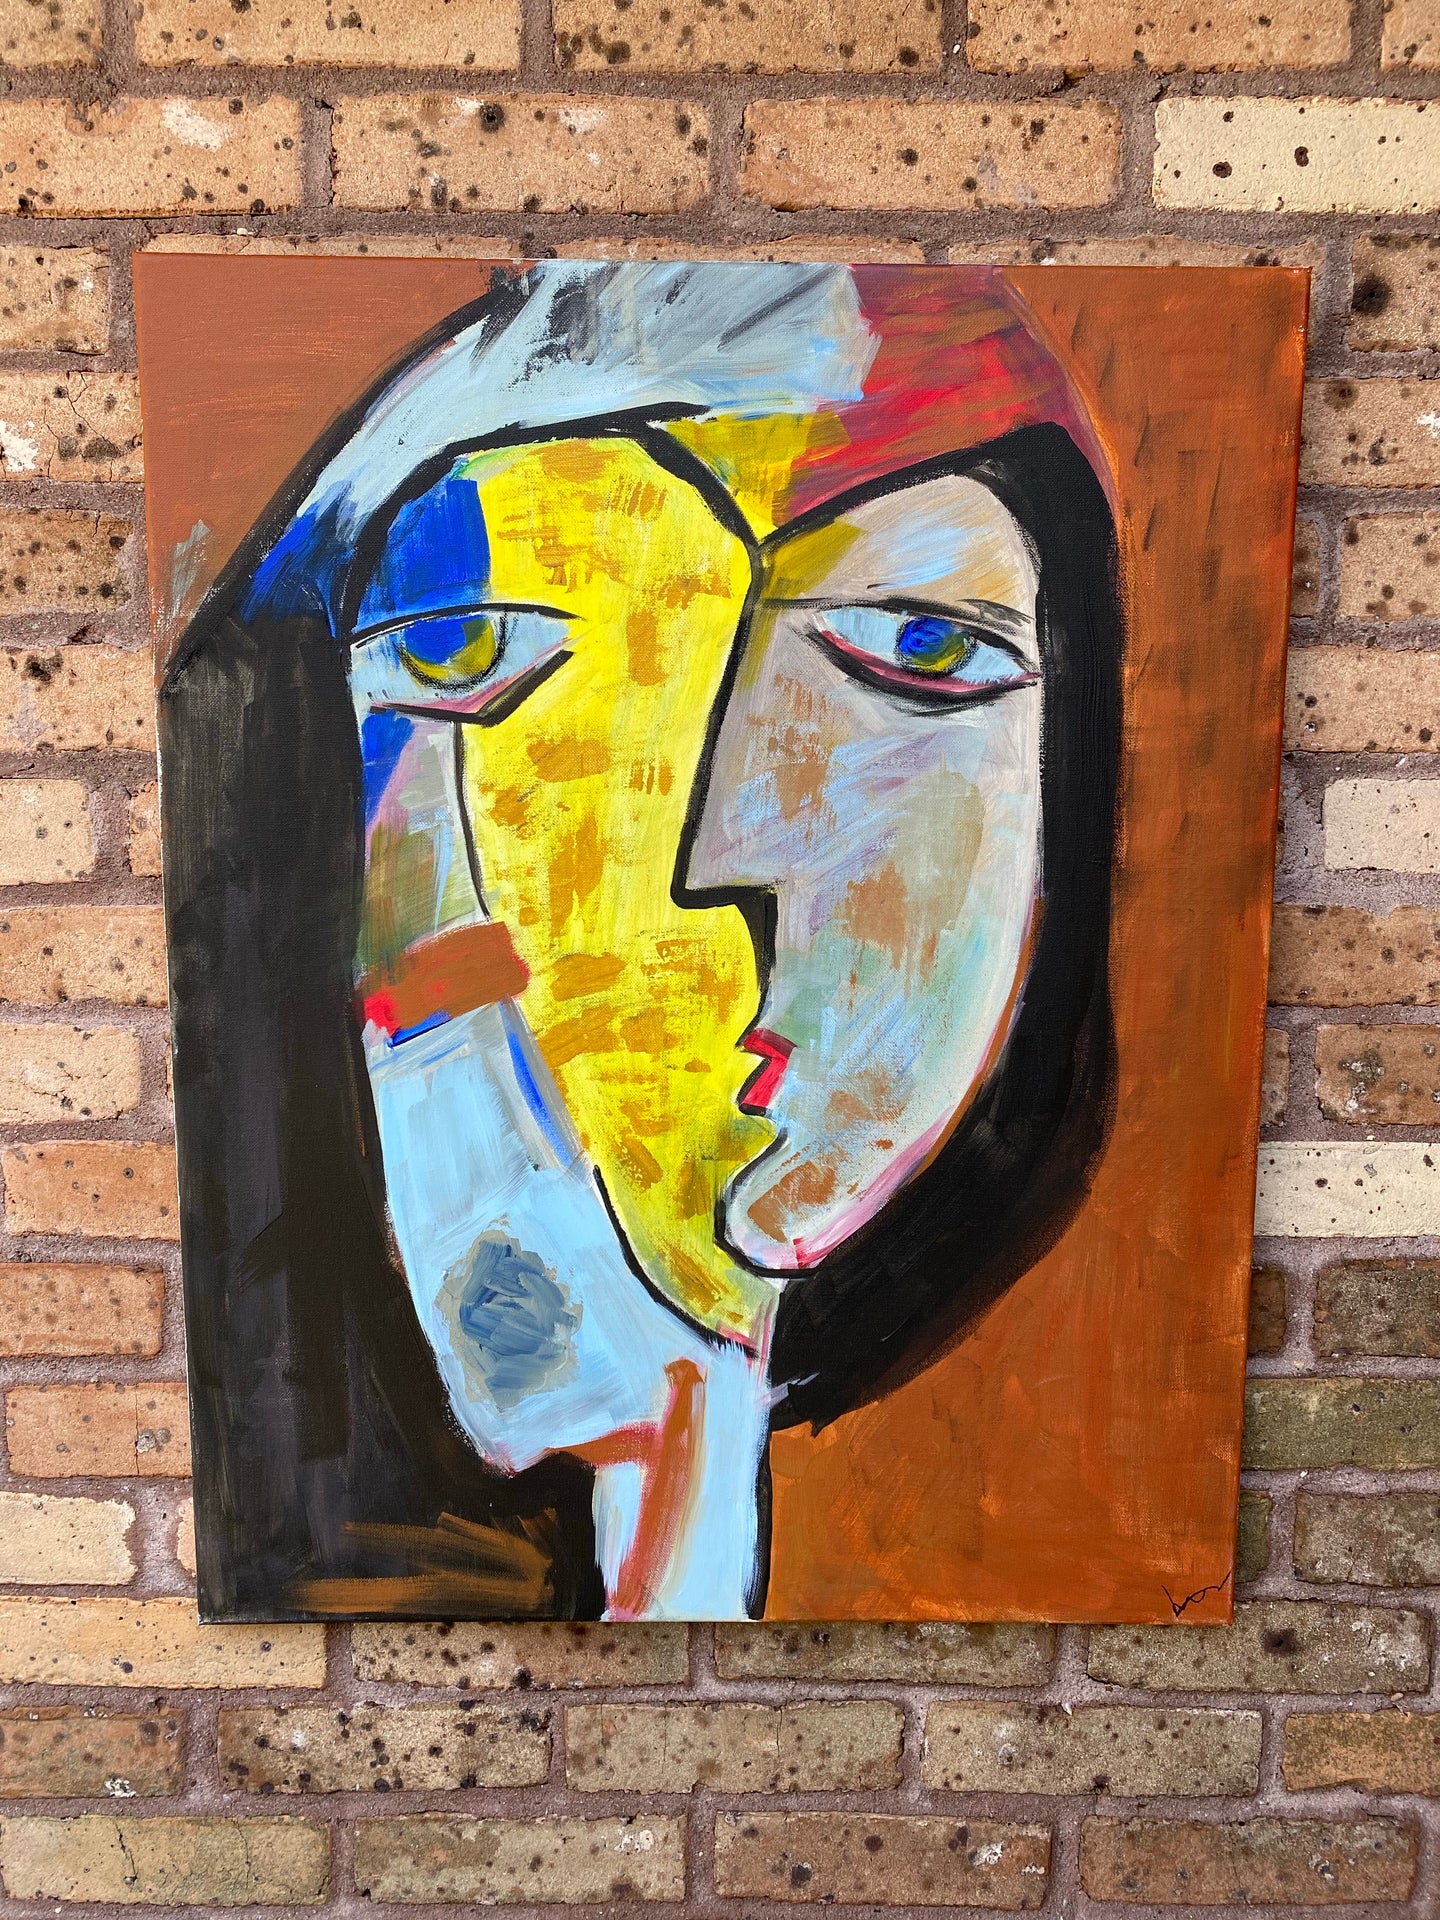 Original Cubist Style Painting on Canvas